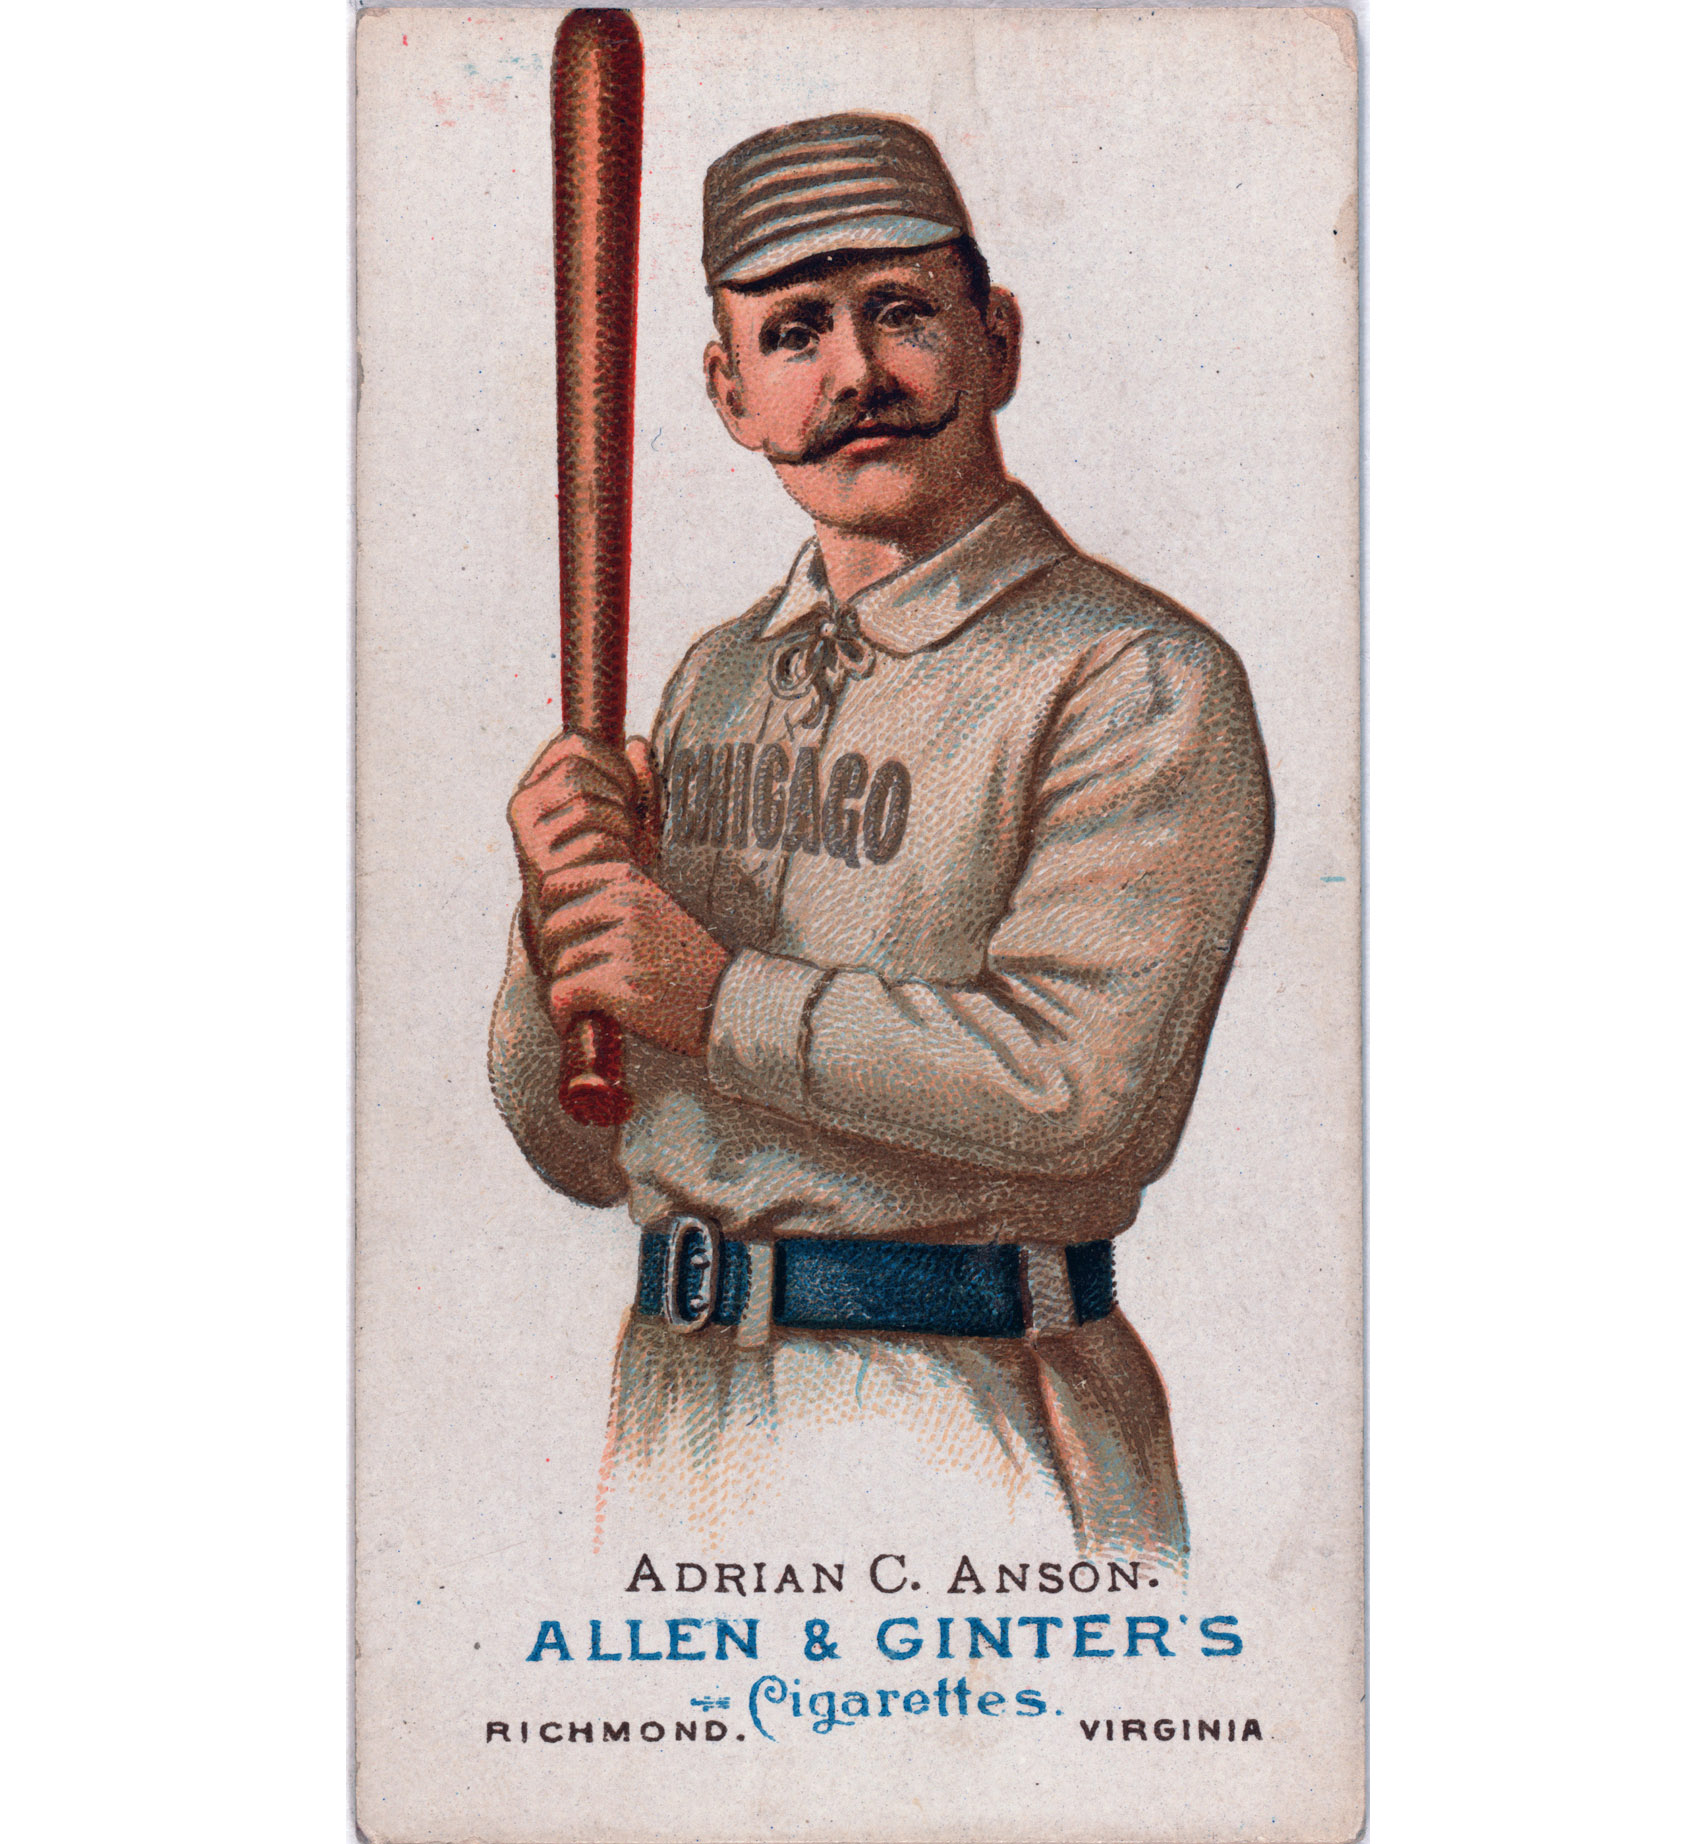 A baseball card for Adrian C. Anson, first baseman for the Chicago White Stockings. Issued by Allen & Ginter Company, 1887. View full size